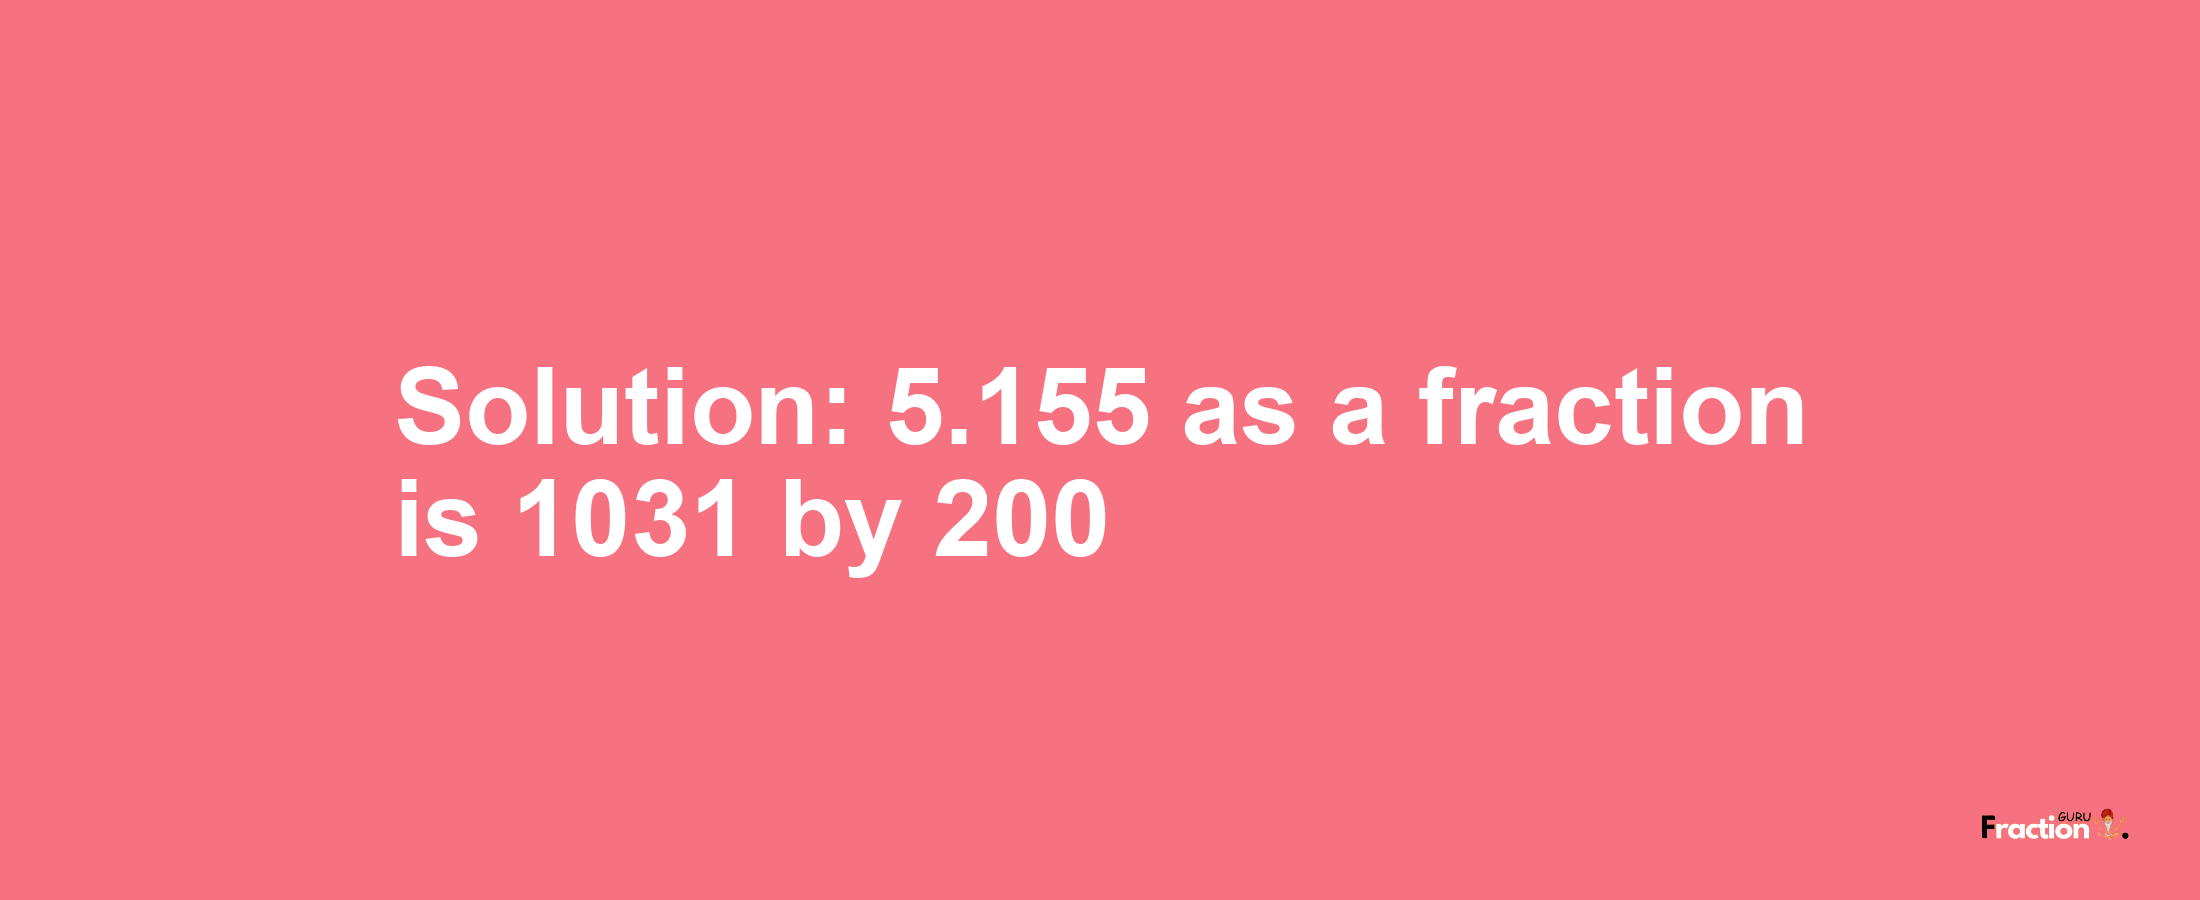 Solution:5.155 as a fraction is 1031/200